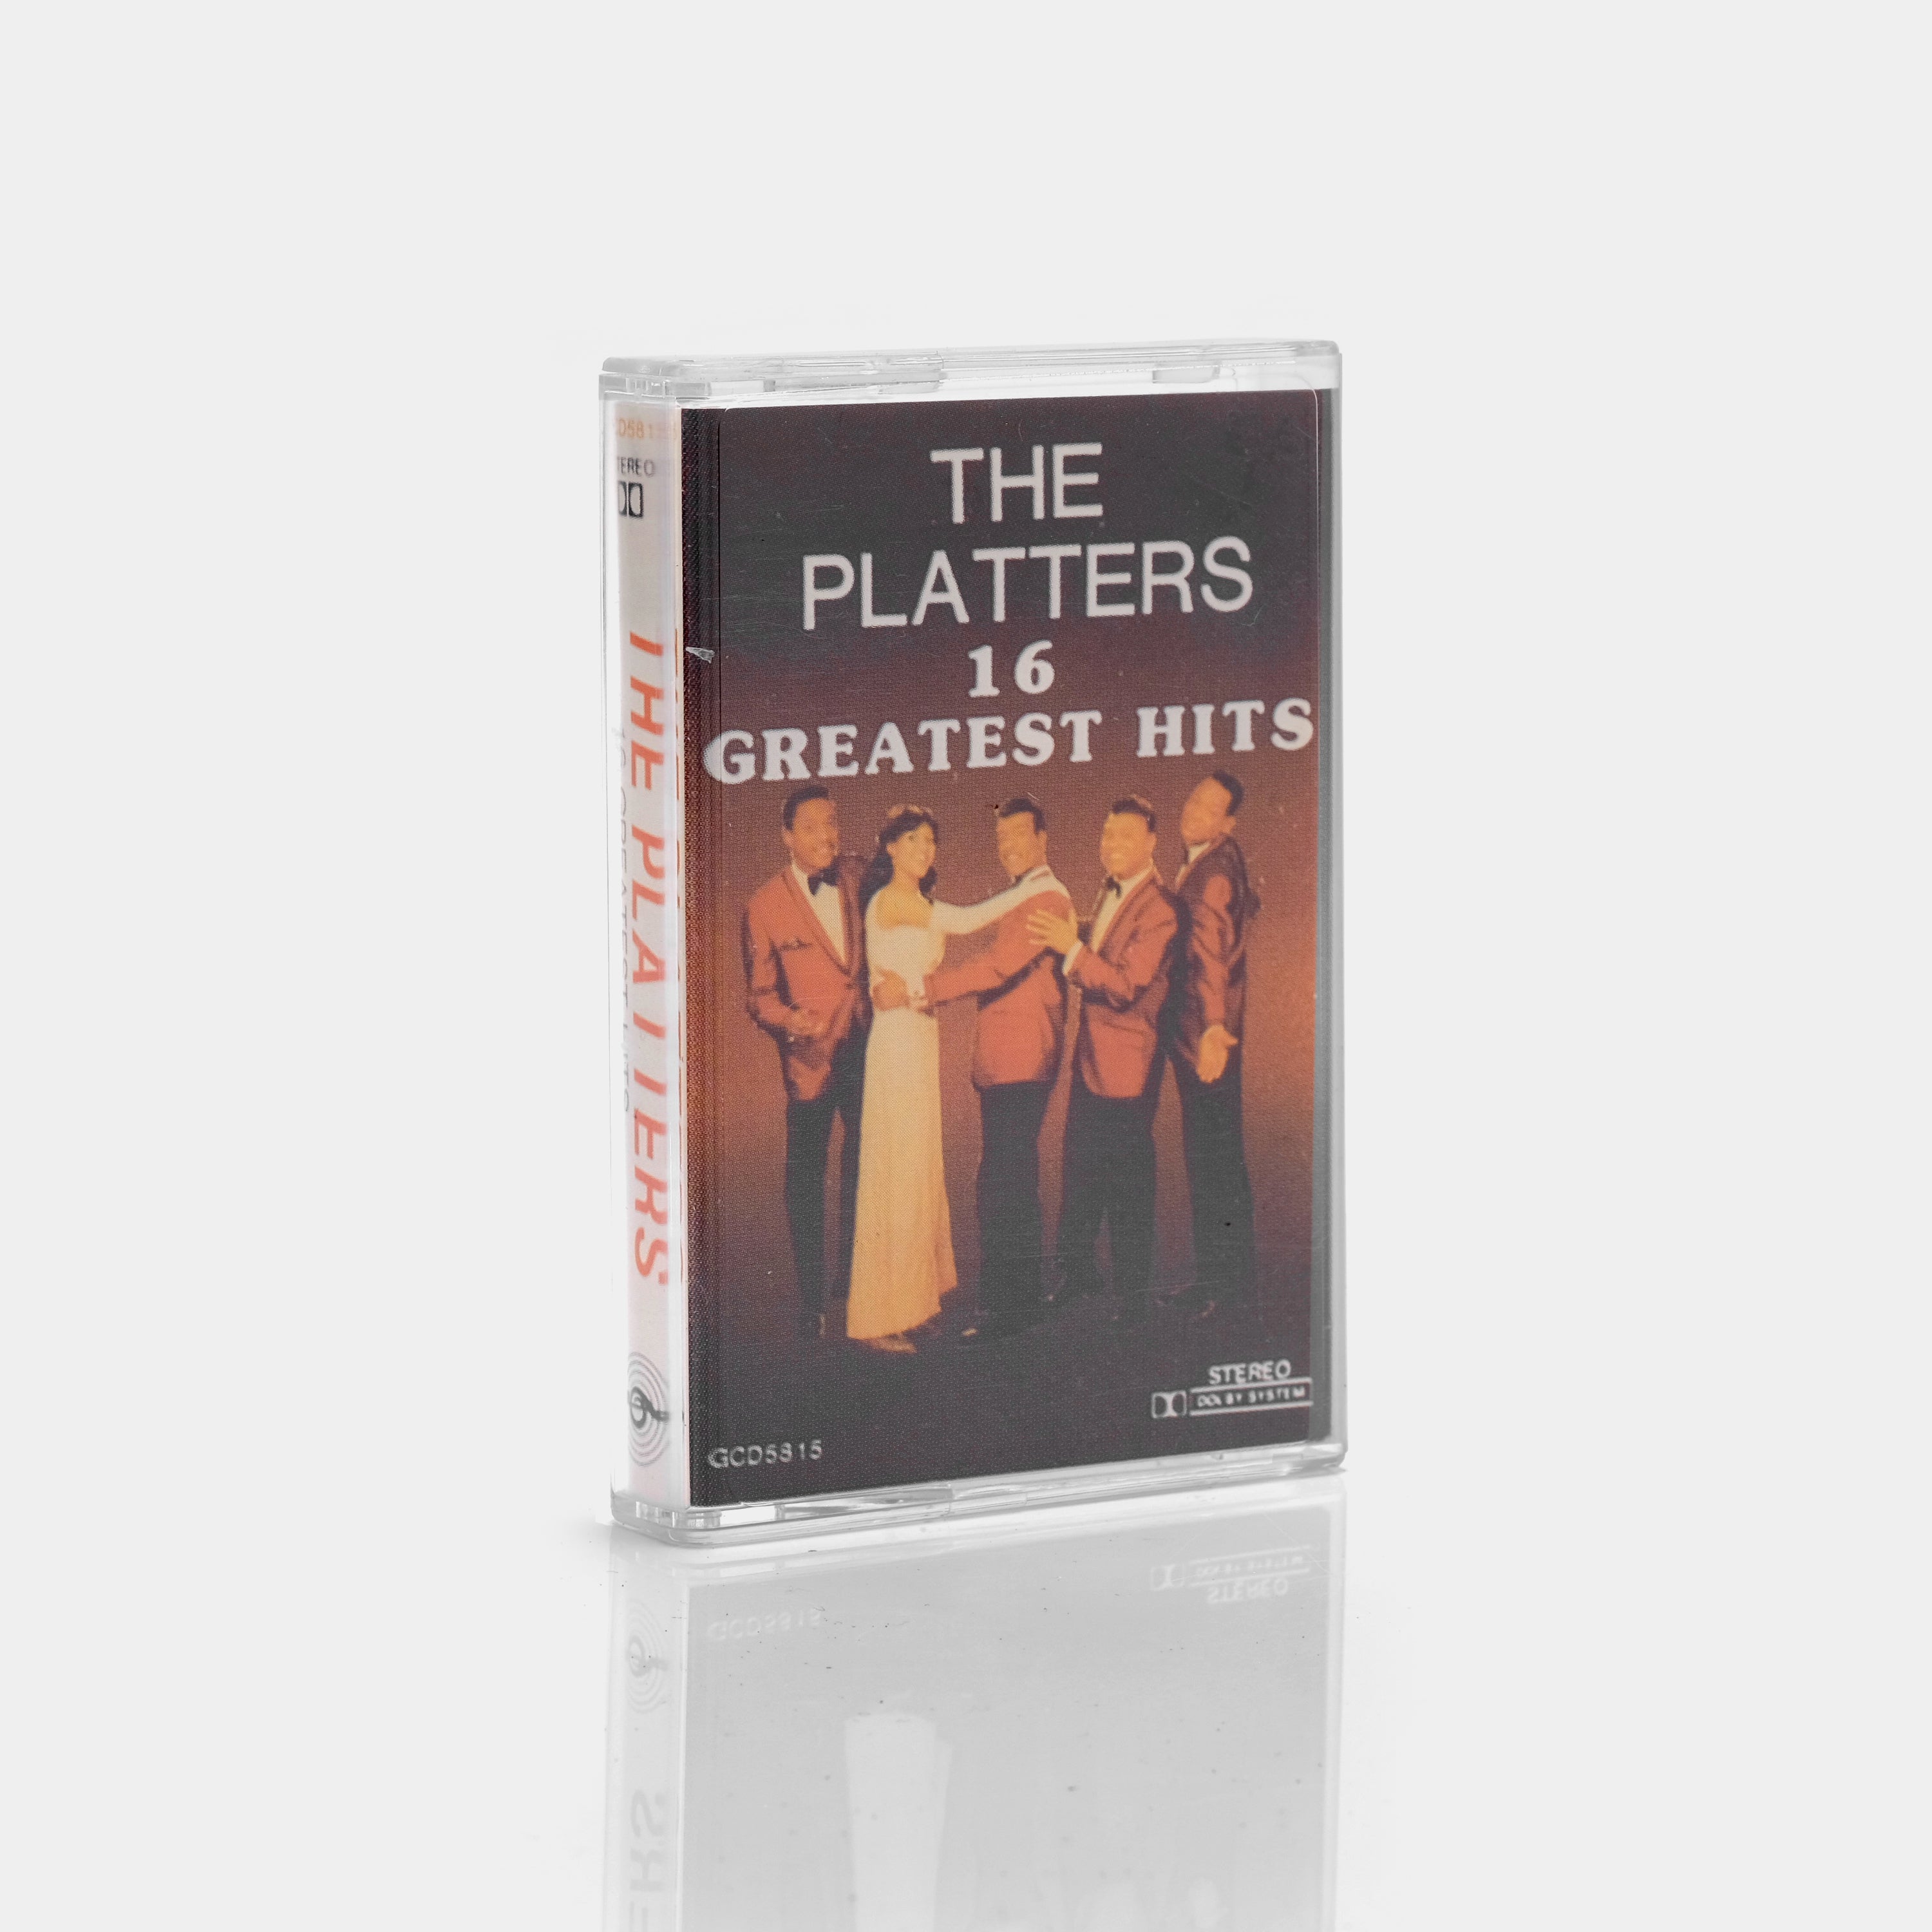 The Platters - 16 Greatest Hits Cassette Tape